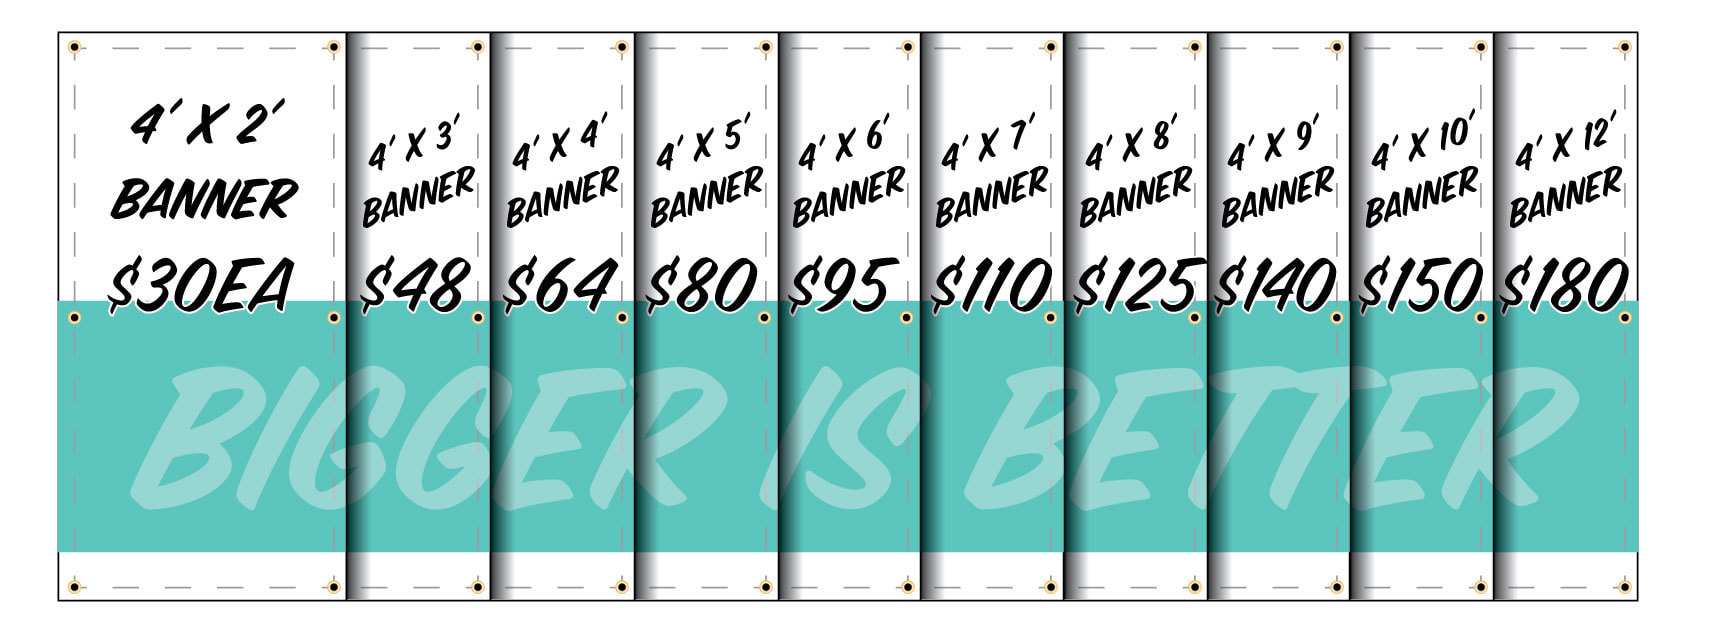 4 foot outdoor banner select a length